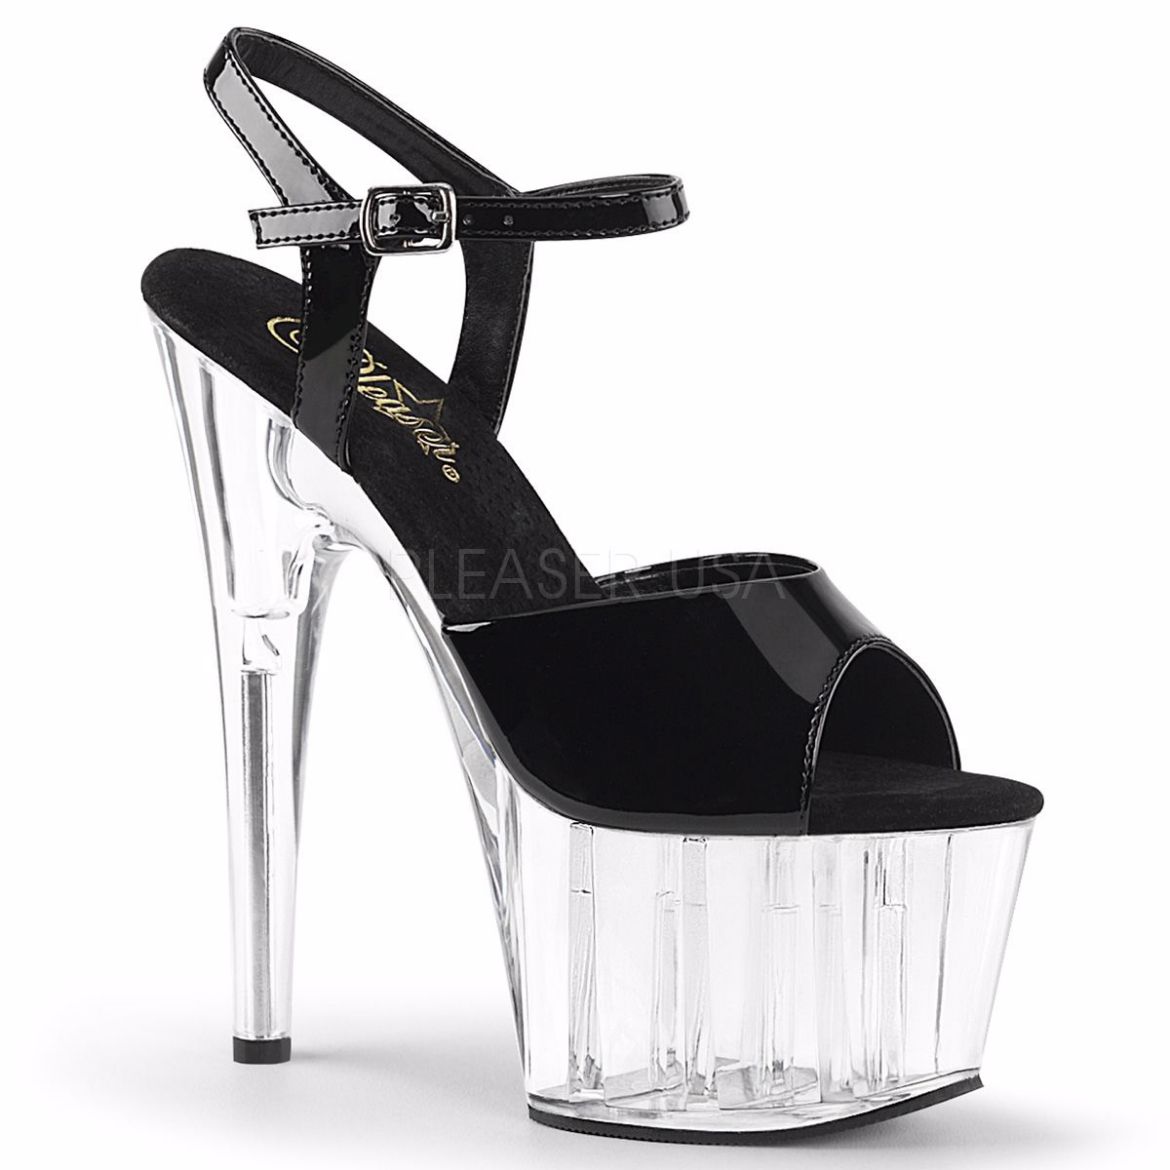 Product image of Pleaser Adore-709 Black Patent/ Clear,  7 inch (17.8 cm) Heel, 2 3/4 inch (7 cm) Platform Sandal Shoes